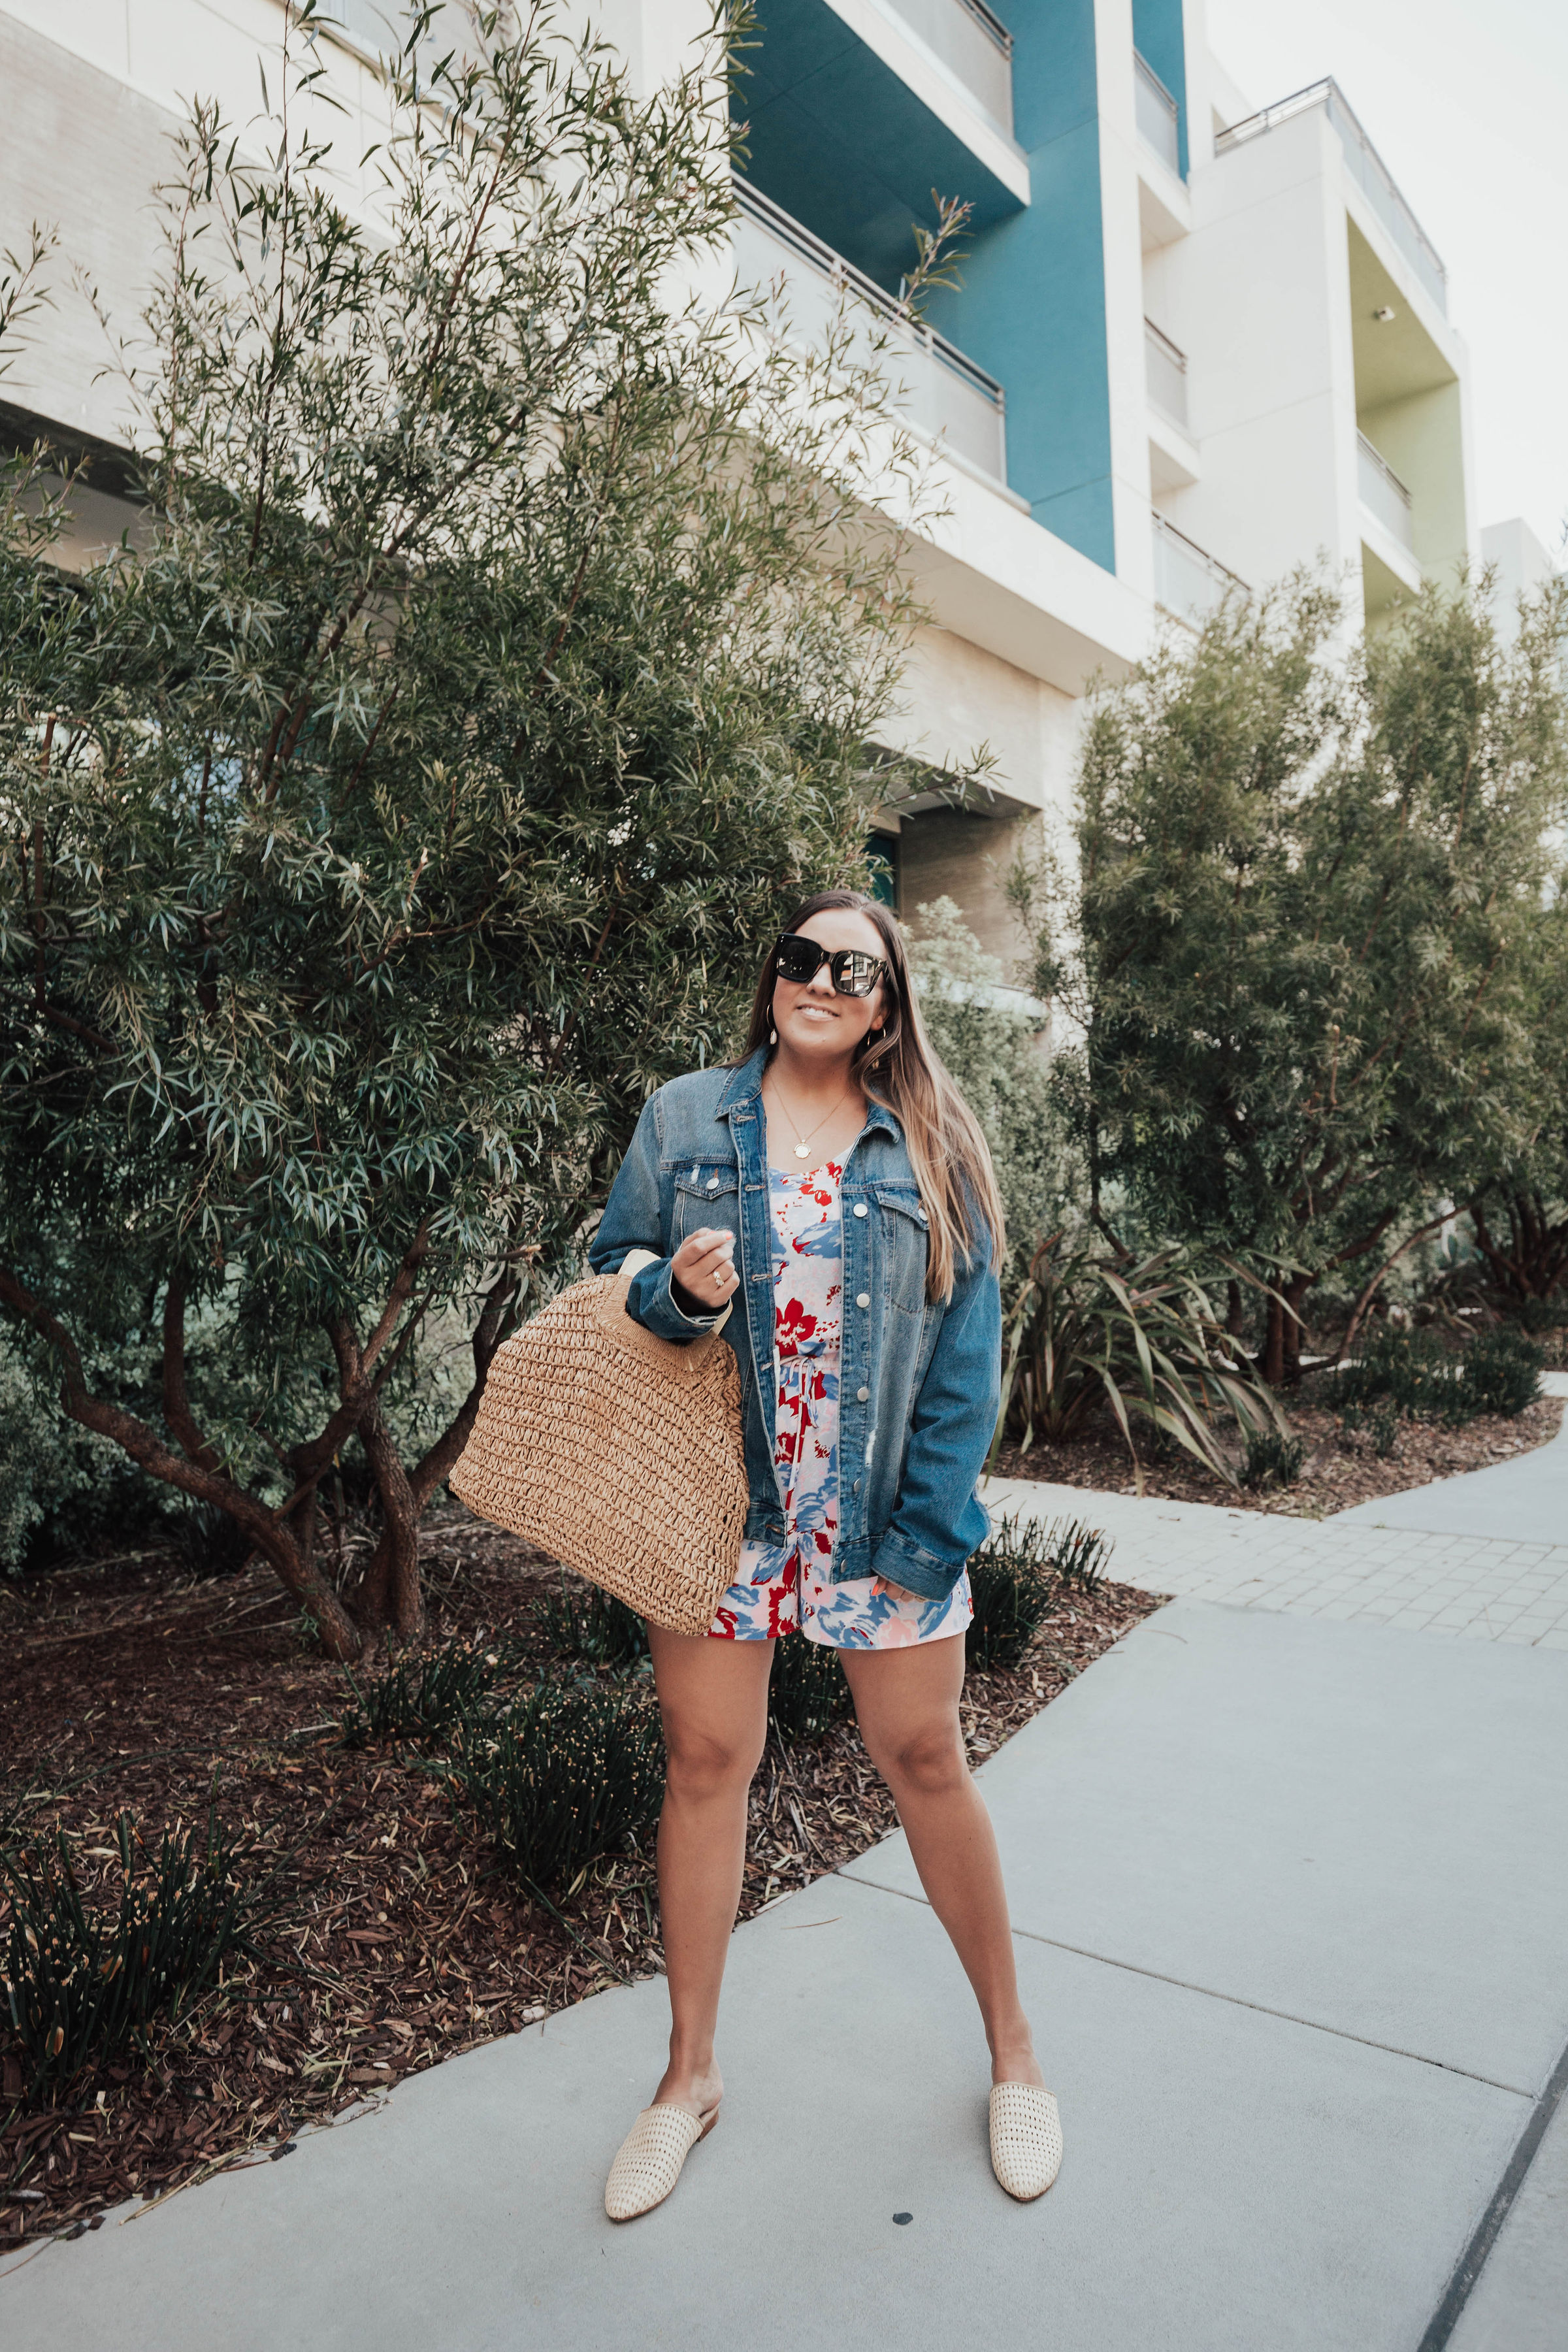 San Francisco blogger, Ashley Zeal, from Two Peas in a Prada shares her 4th of July Outfit ideas. She is sharing a ton of red, white and blue items you can mix and match!